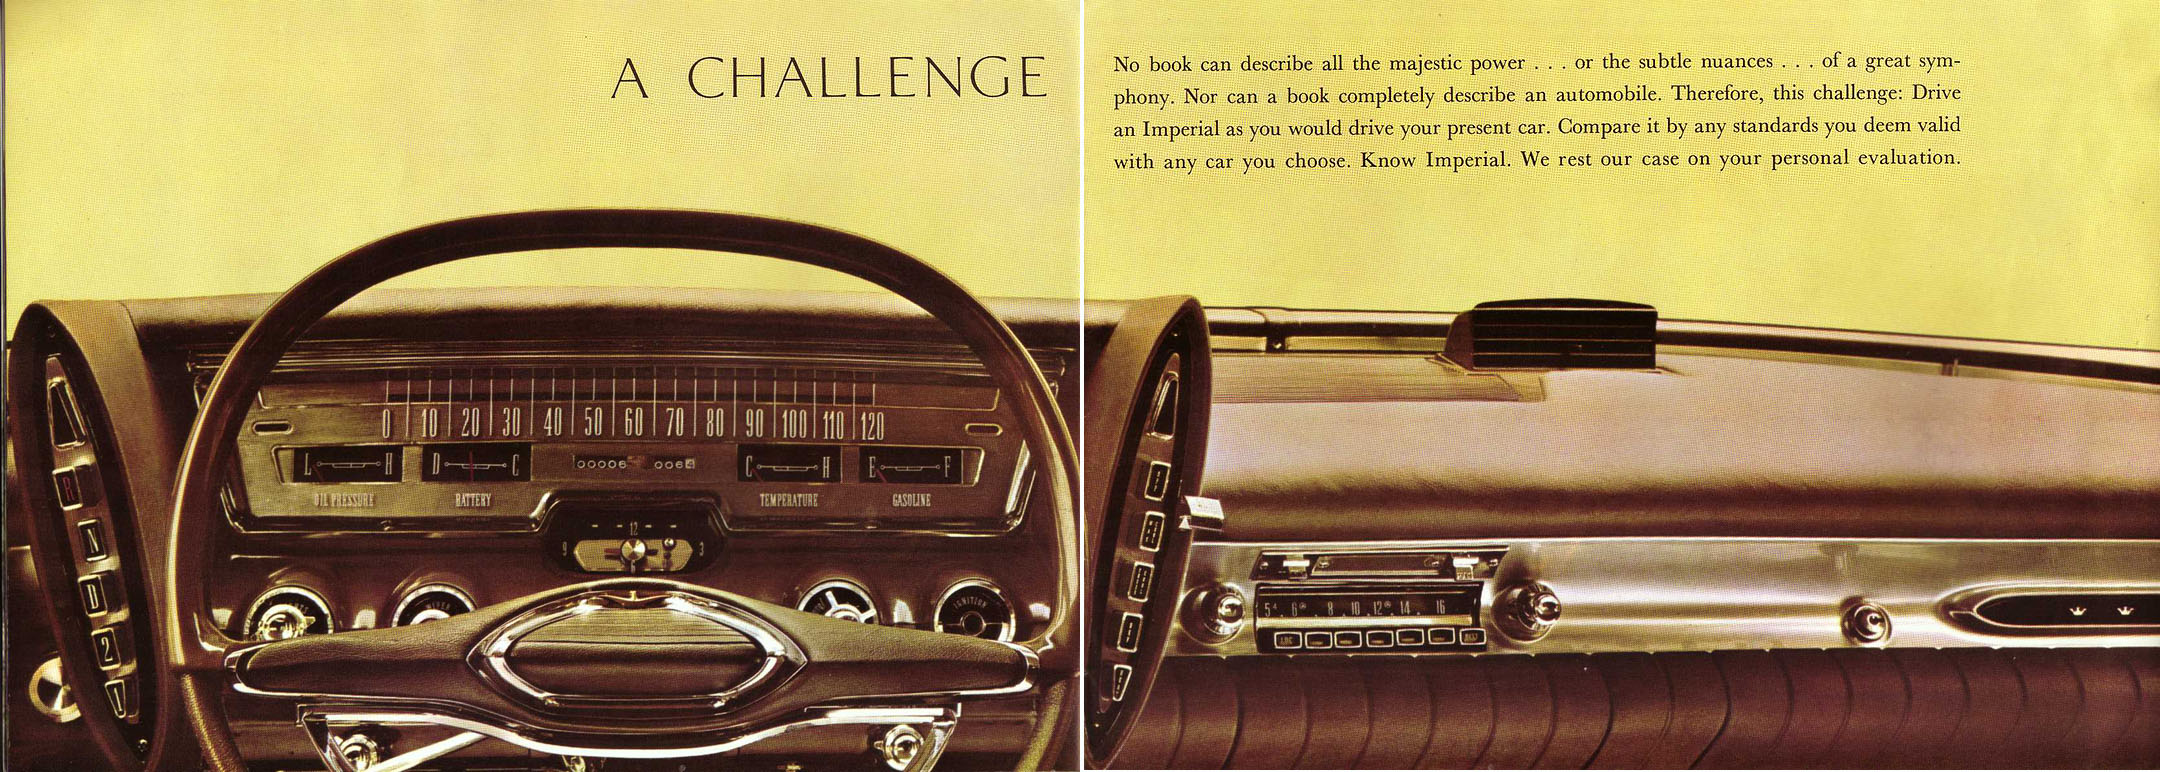 1961 Chrysler Imperial Brochure Page 8